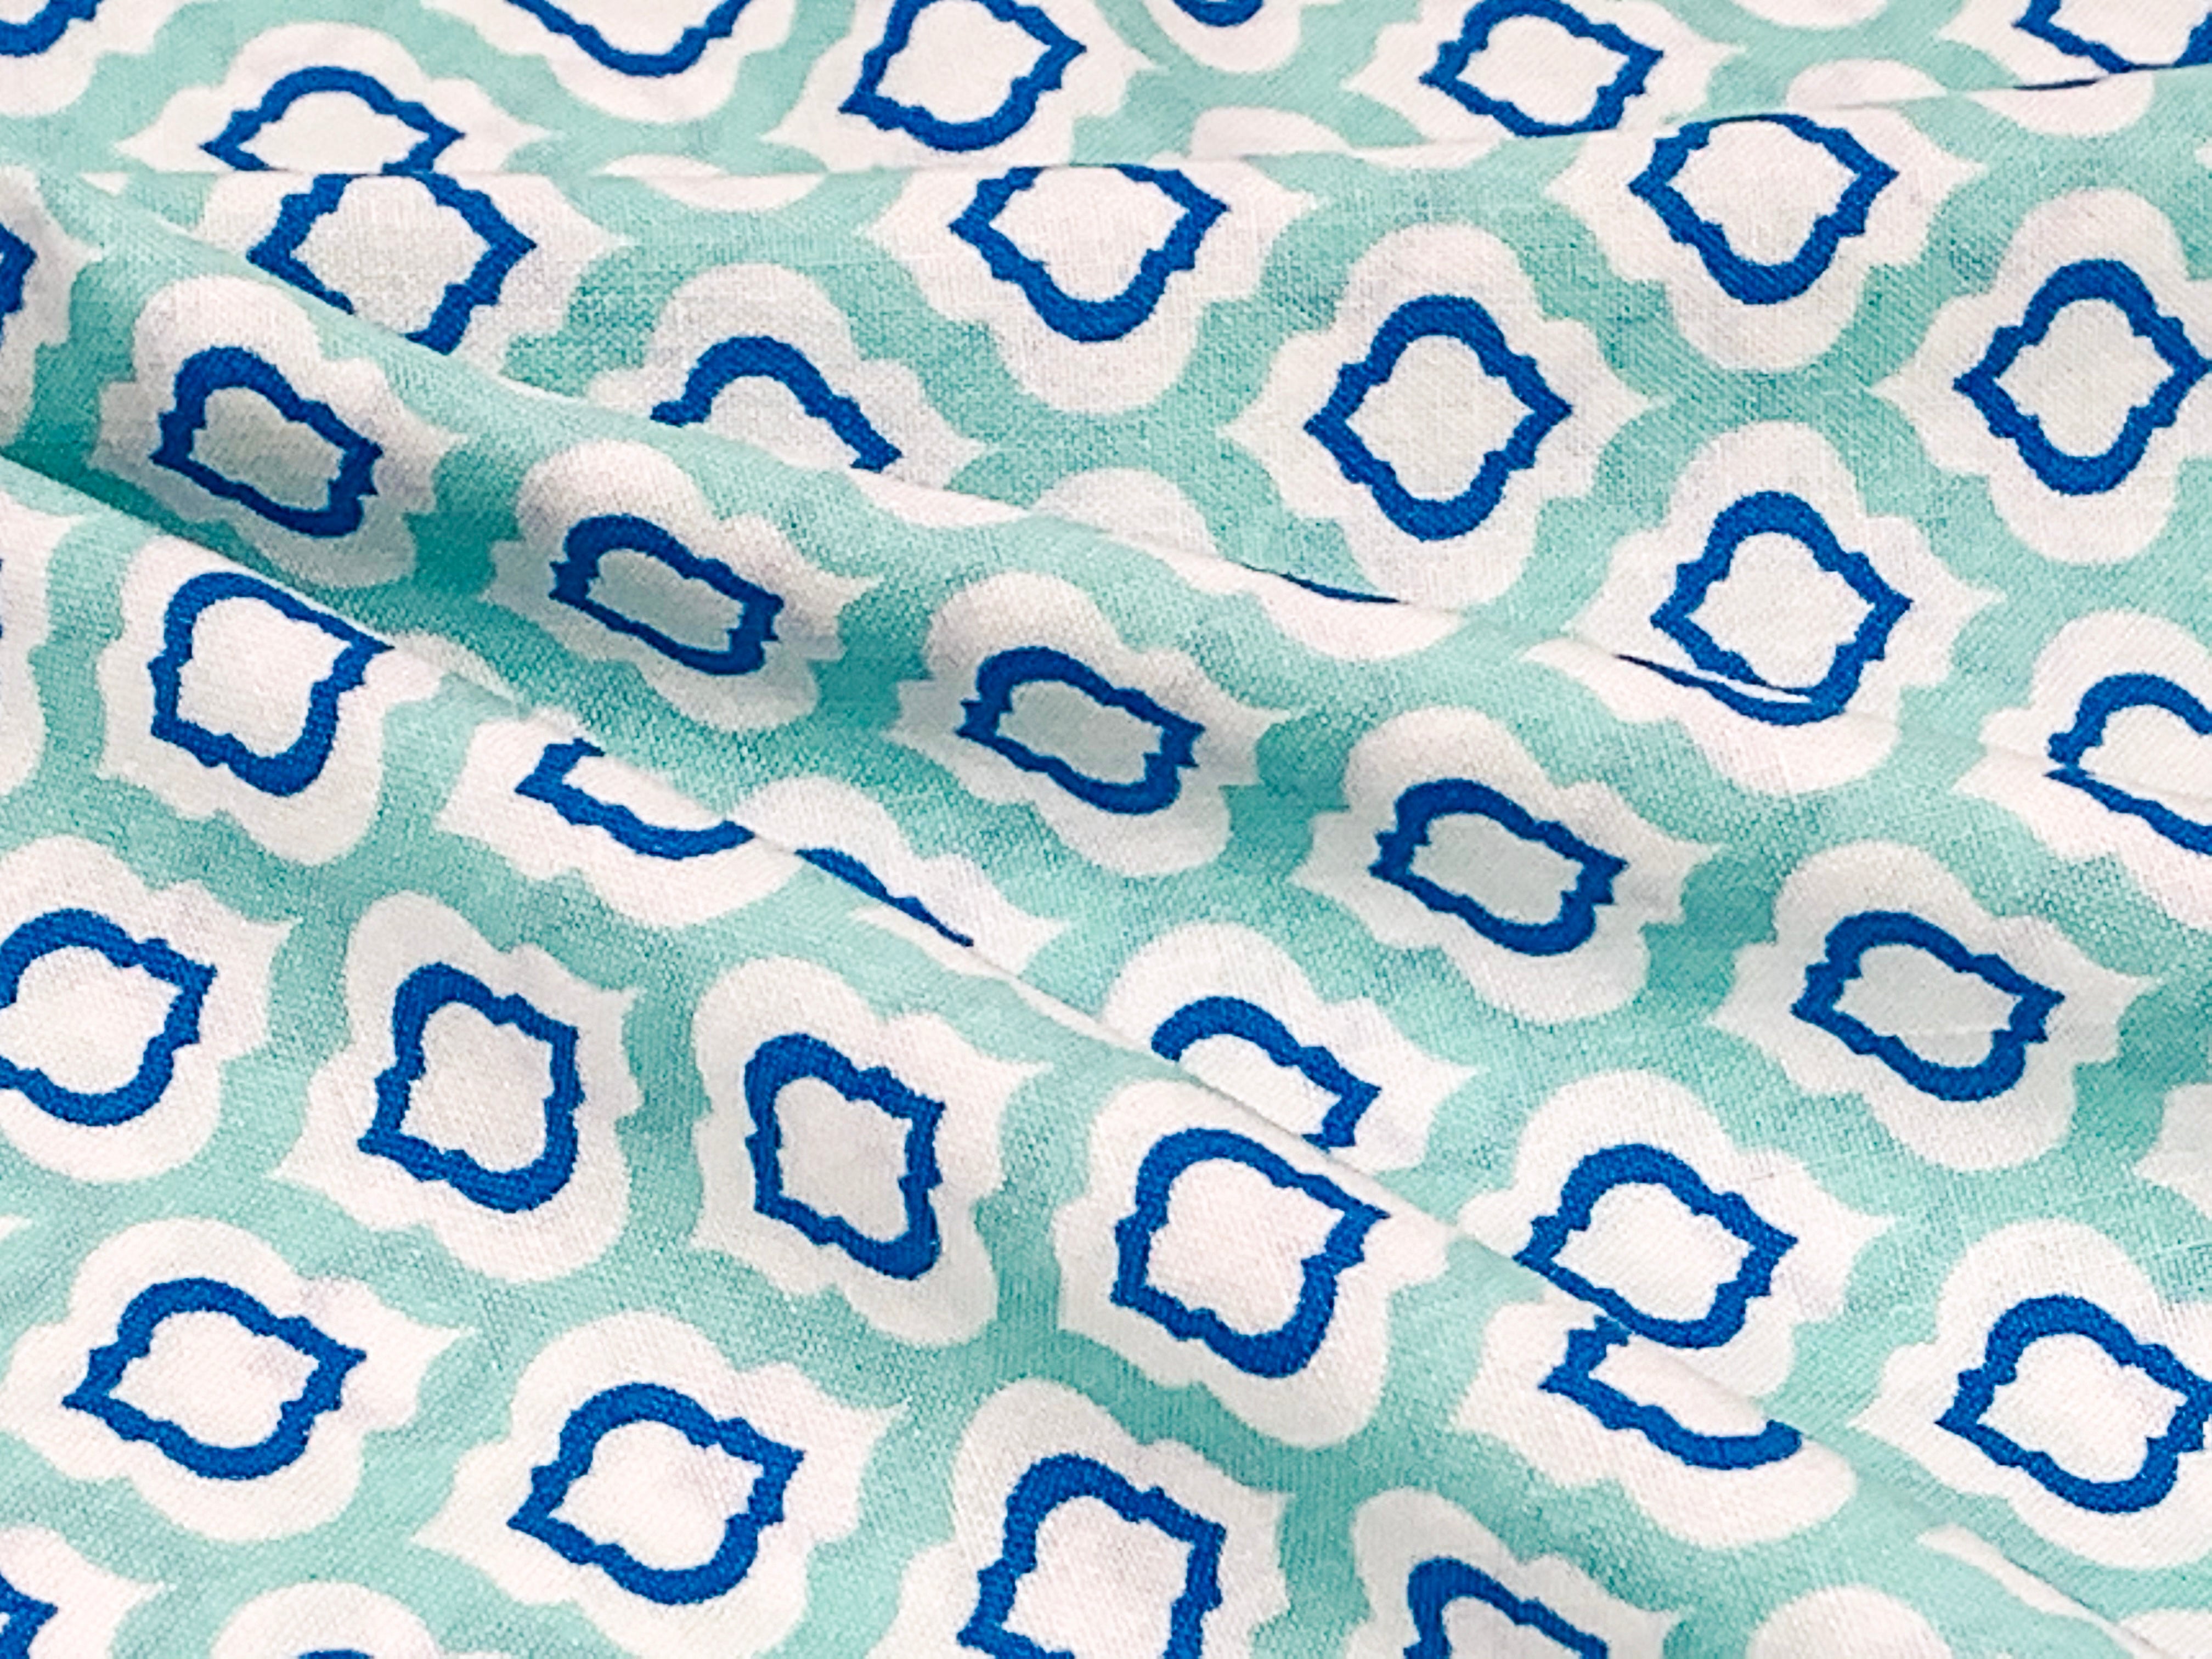 Waverly Inspirations Cotton 44" Rain Drop Aqua Color Sewing Fabric by the Yard